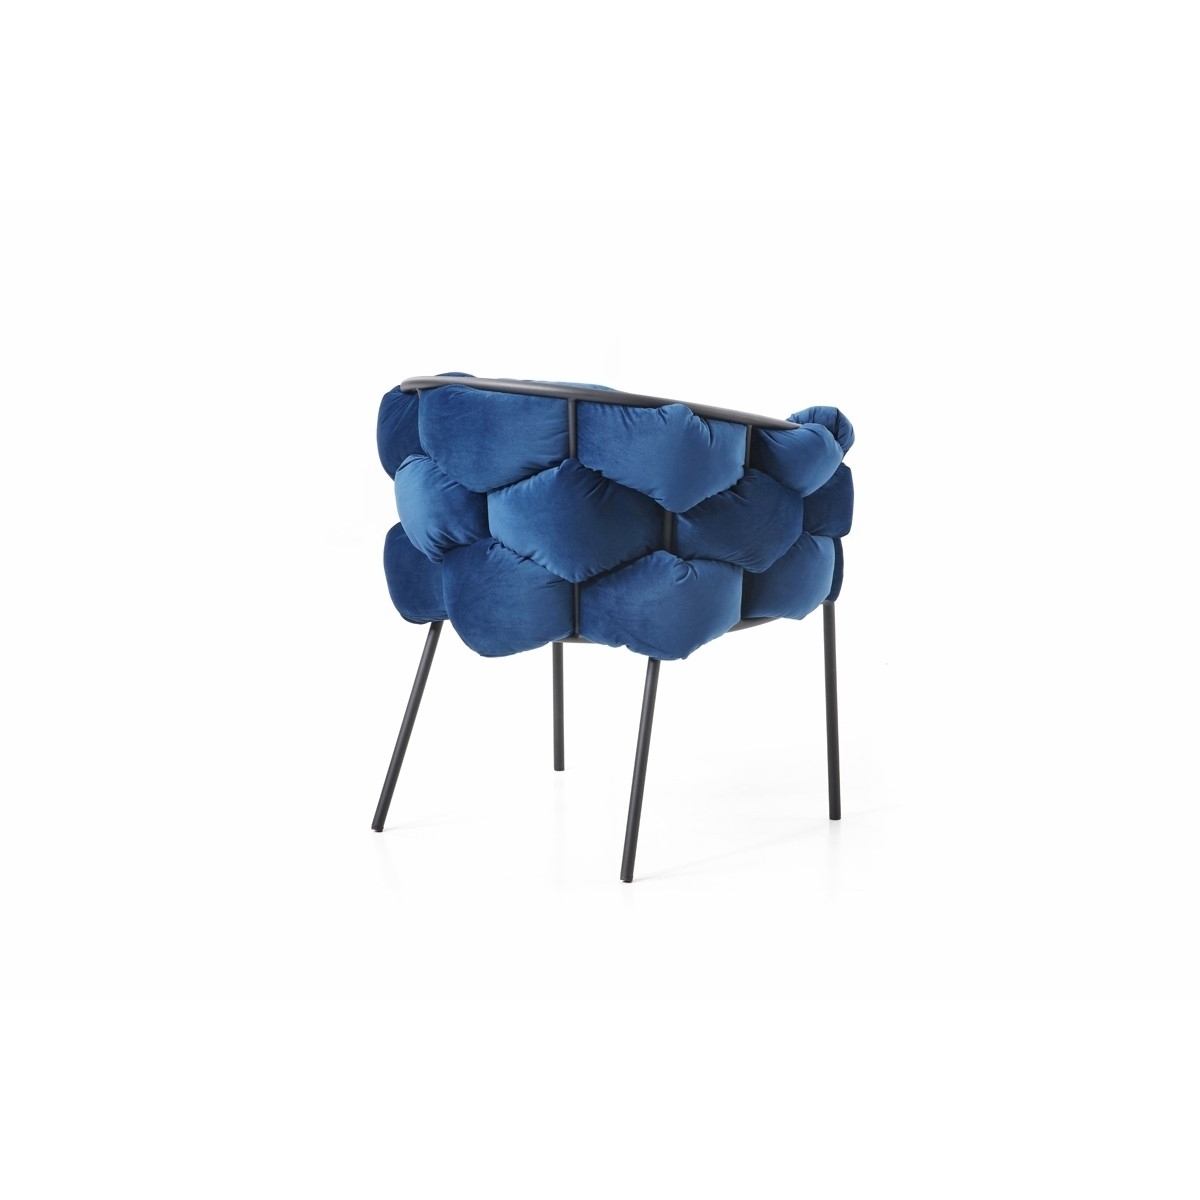 Fabric Dining Chair With Honeycomb Design Padded Backrest, Blue And Black- Saltoro Sherpi